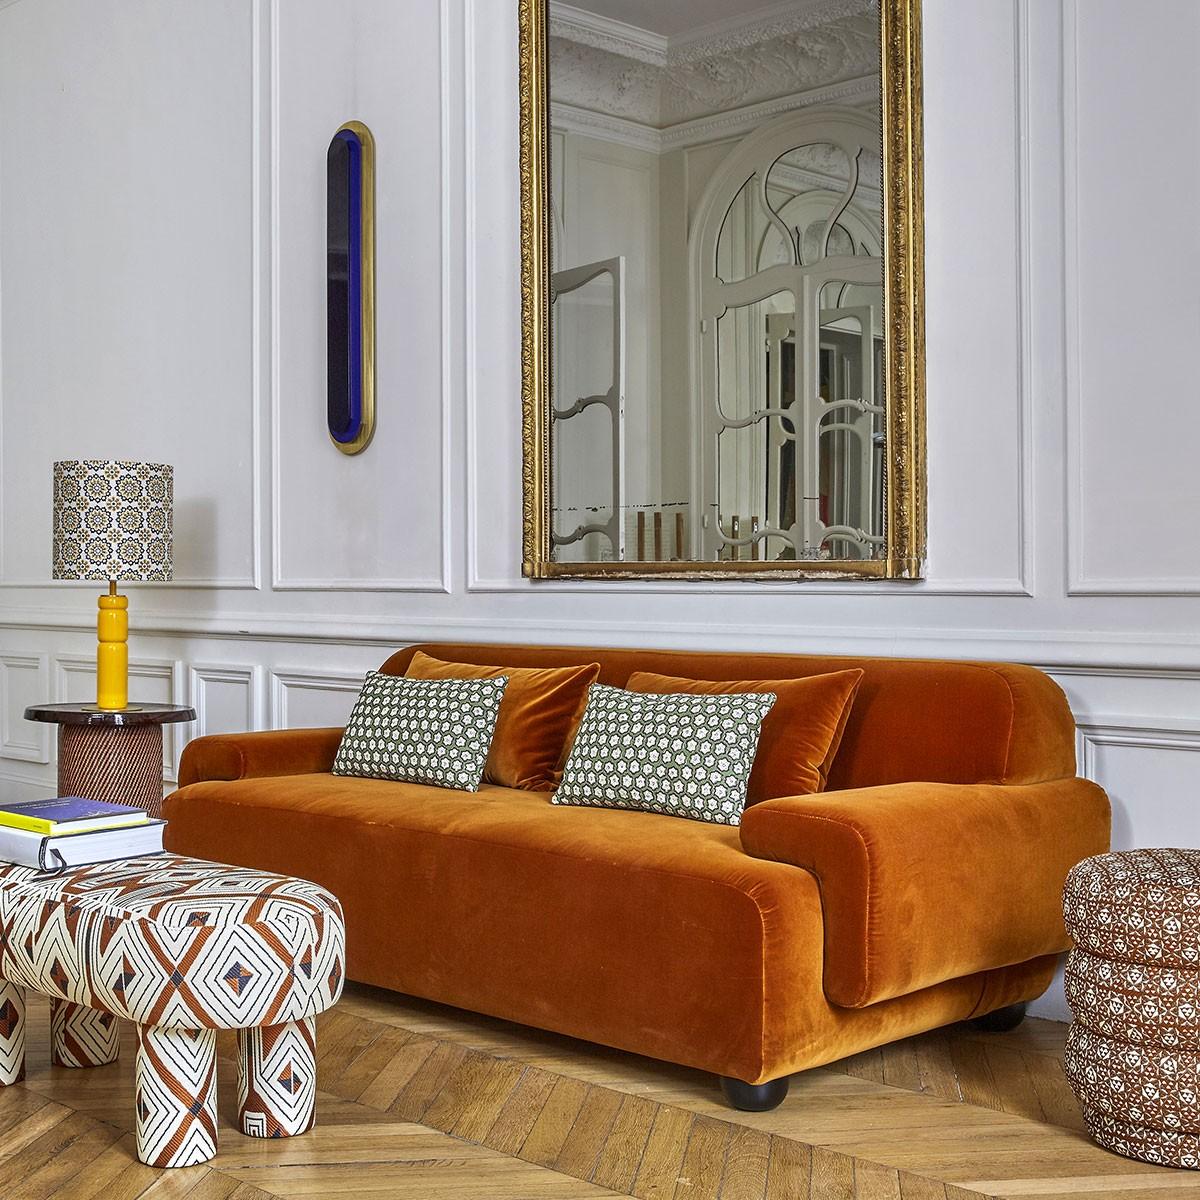 Popus Editions Lena 2.5seater sofa in rust megeve fabric with a knit effect

It looks like it's straight out of a movie, with its generous curves and wide armrests. It is a real invitation to spend long Sundays with the family, comfortably seated